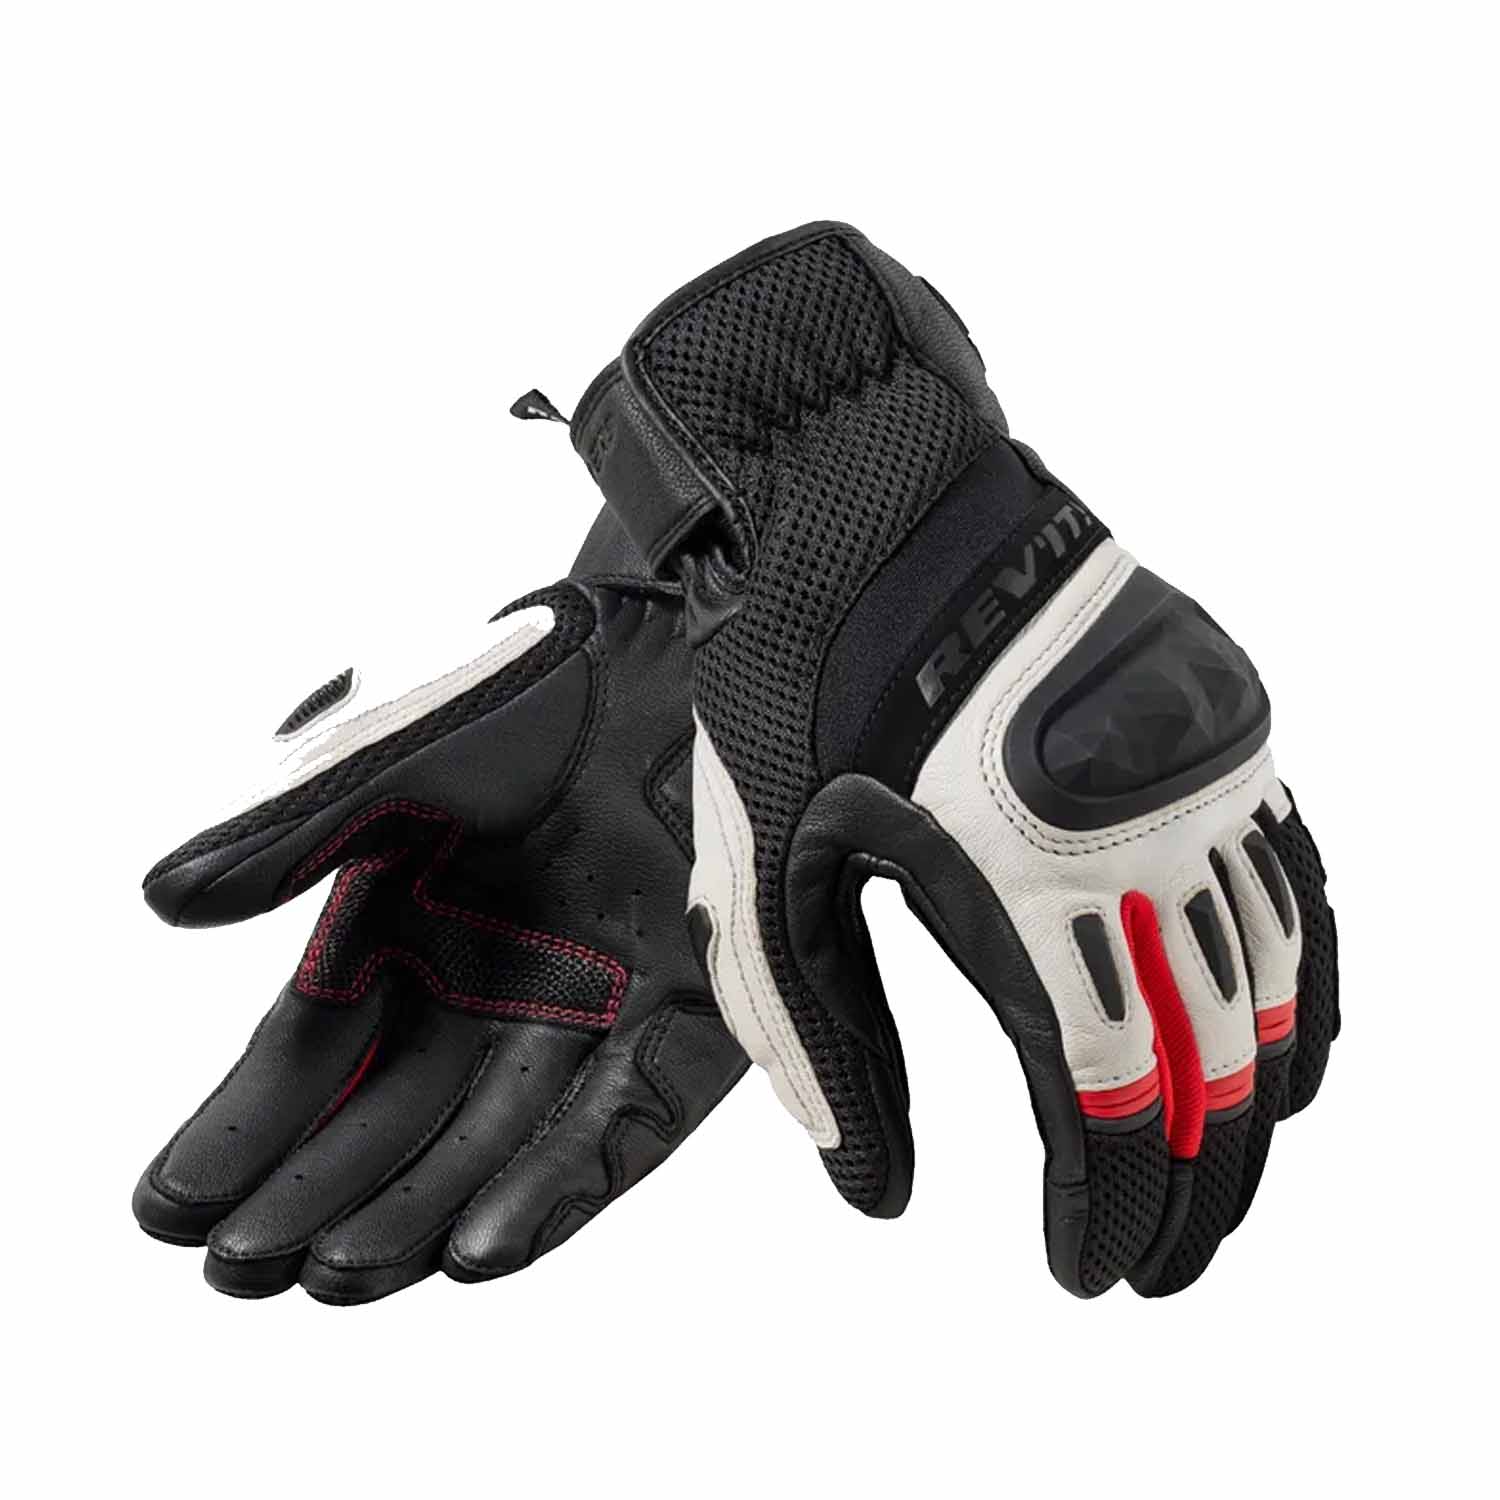 Image of REV'IT! Dirt 4 Gloves Black Red Taille XL